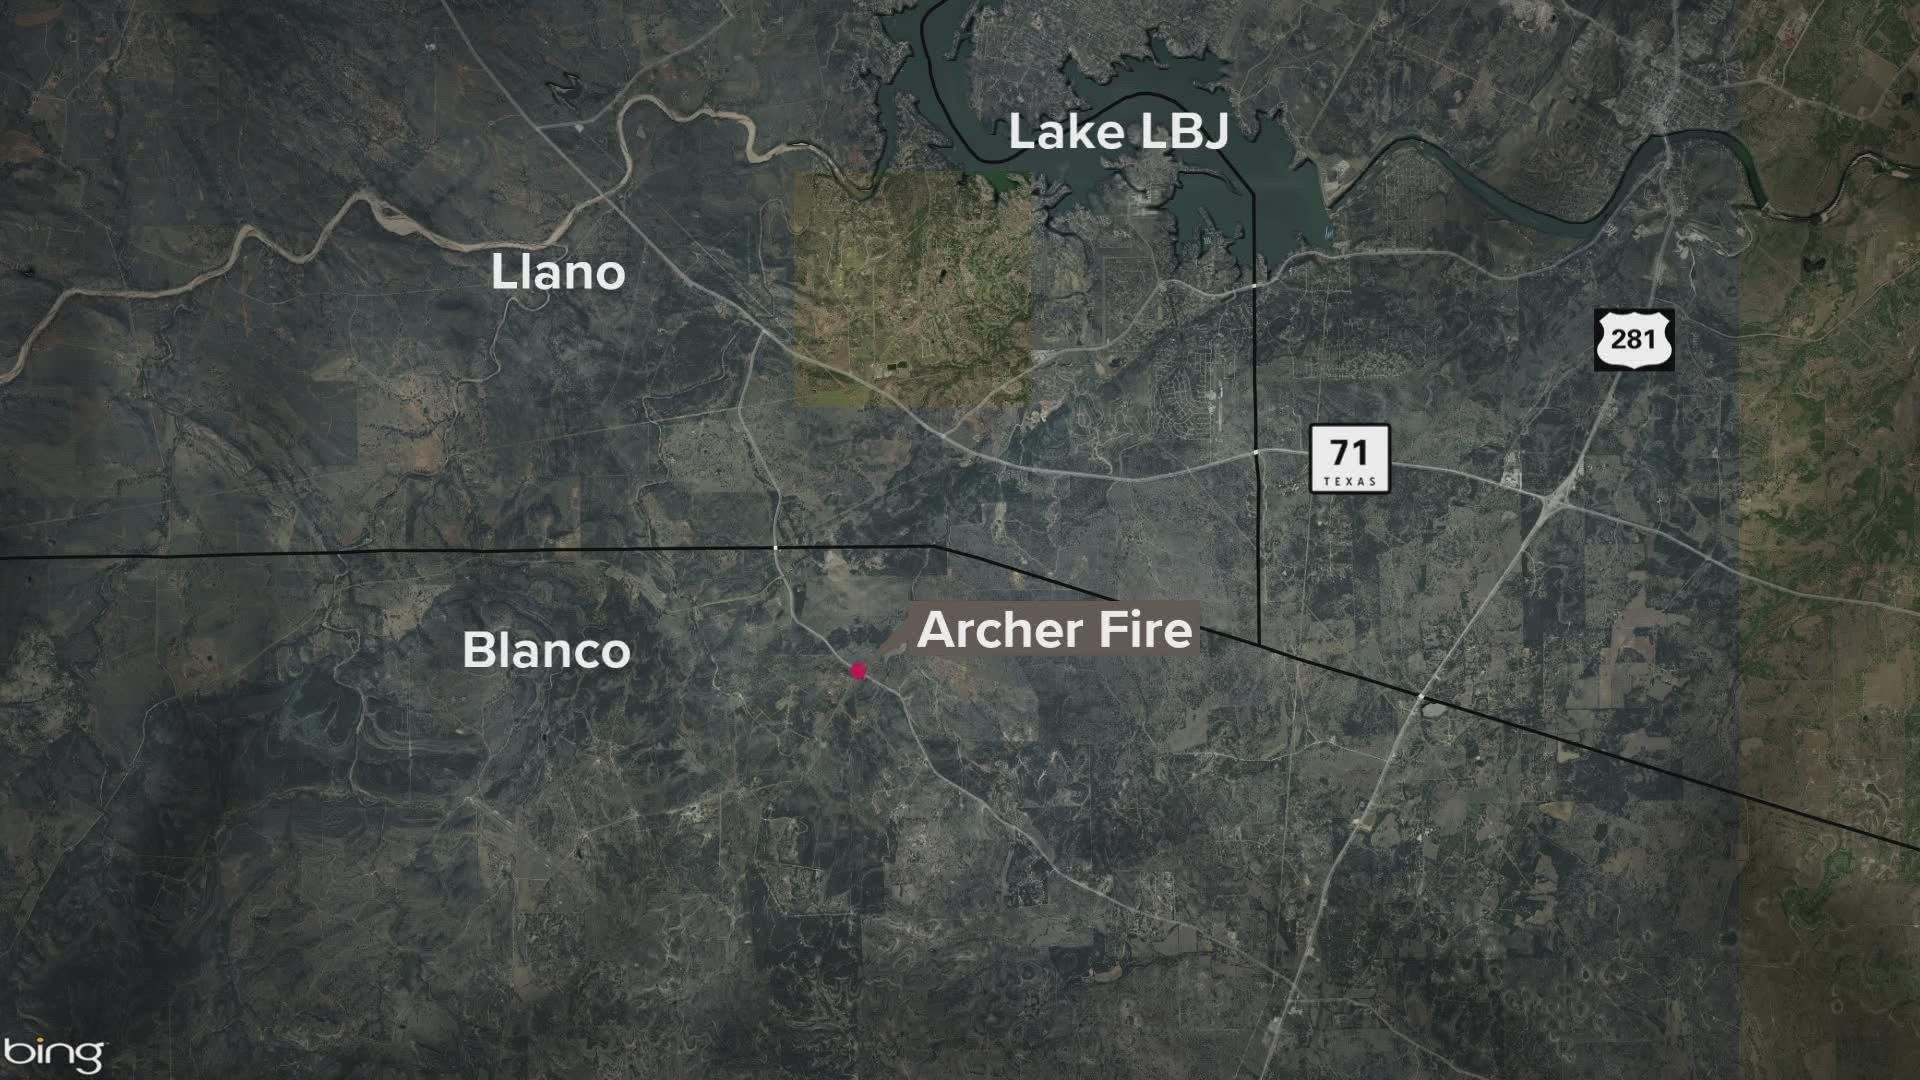 Officials say the fire has burned through more than 450 acres.